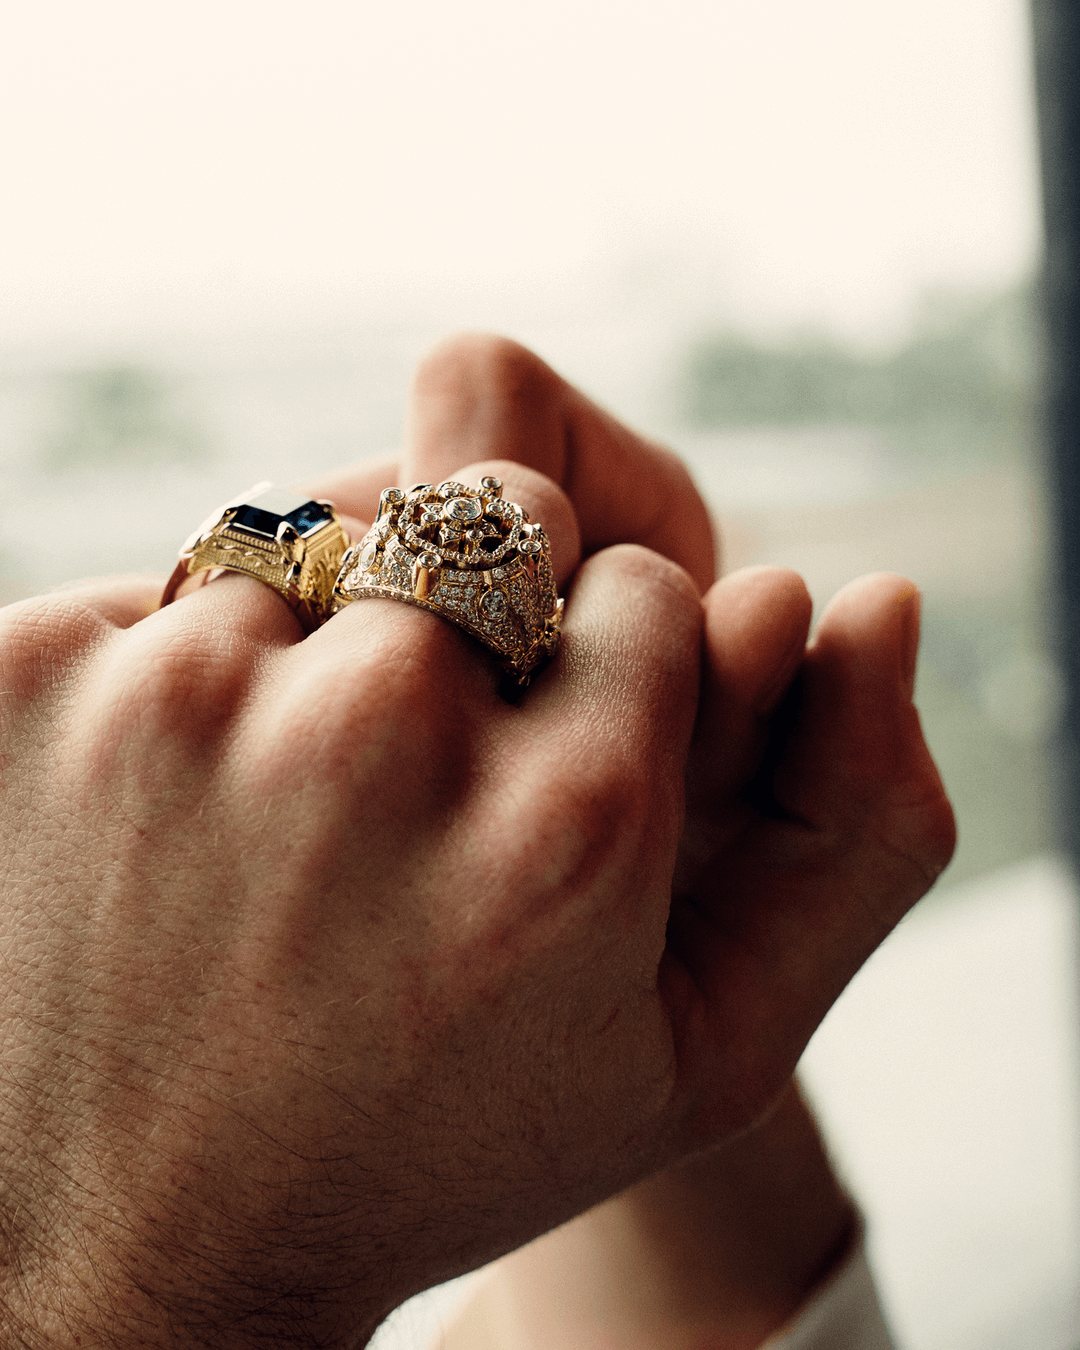 Diamond Rings Can't Be Worn On Any Finger. Find Out Why